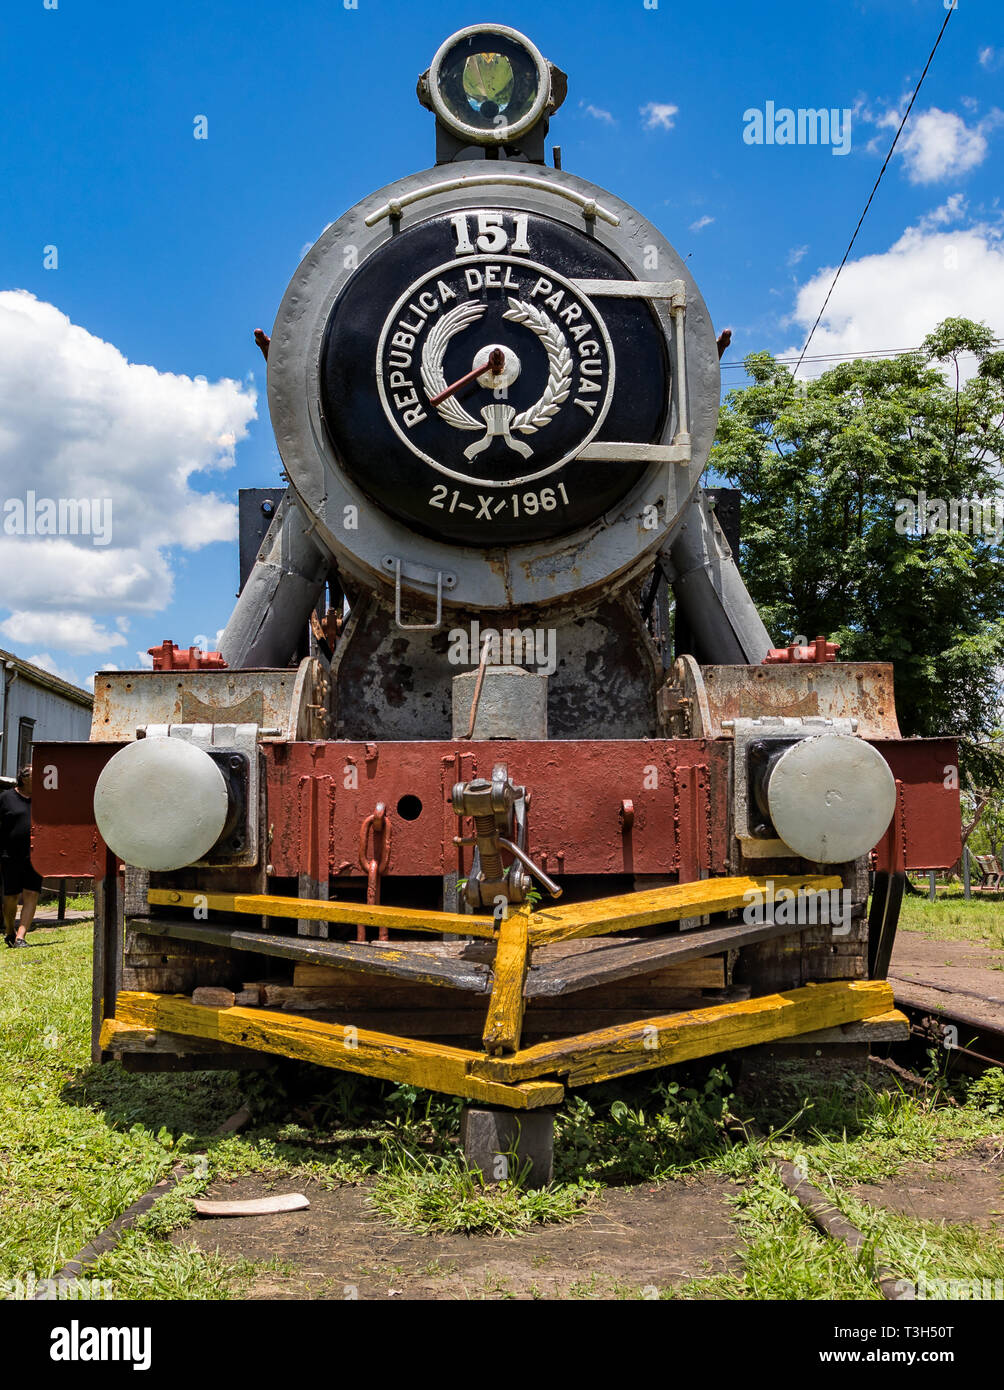 Villarrica / Paraguari, Paraguay - November 21, 2018: Old rusted steam locomotive in Paraguay. In Paraguay there is no more rail traffic today. Stock Photo